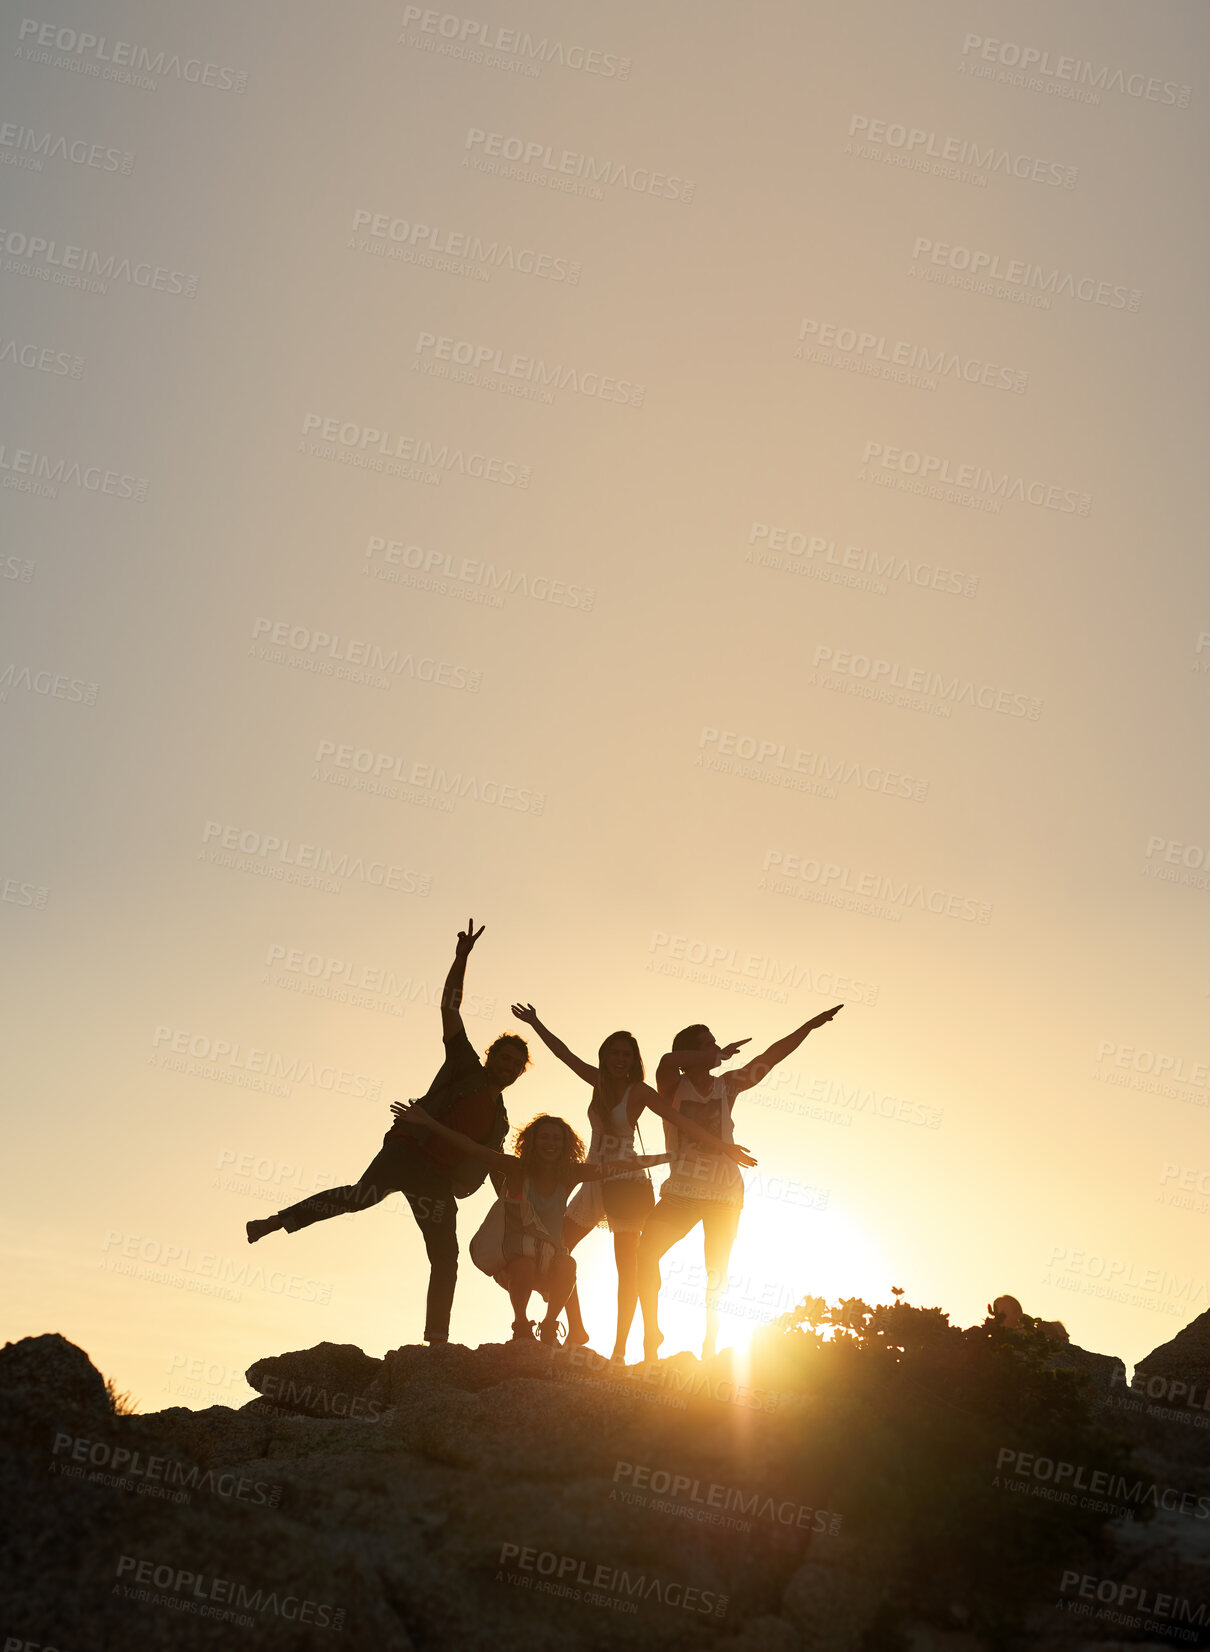 Buy stock photo Group of friends posing standing on rocks at sunset having fun summer vacation lifestyle celebrating friendship